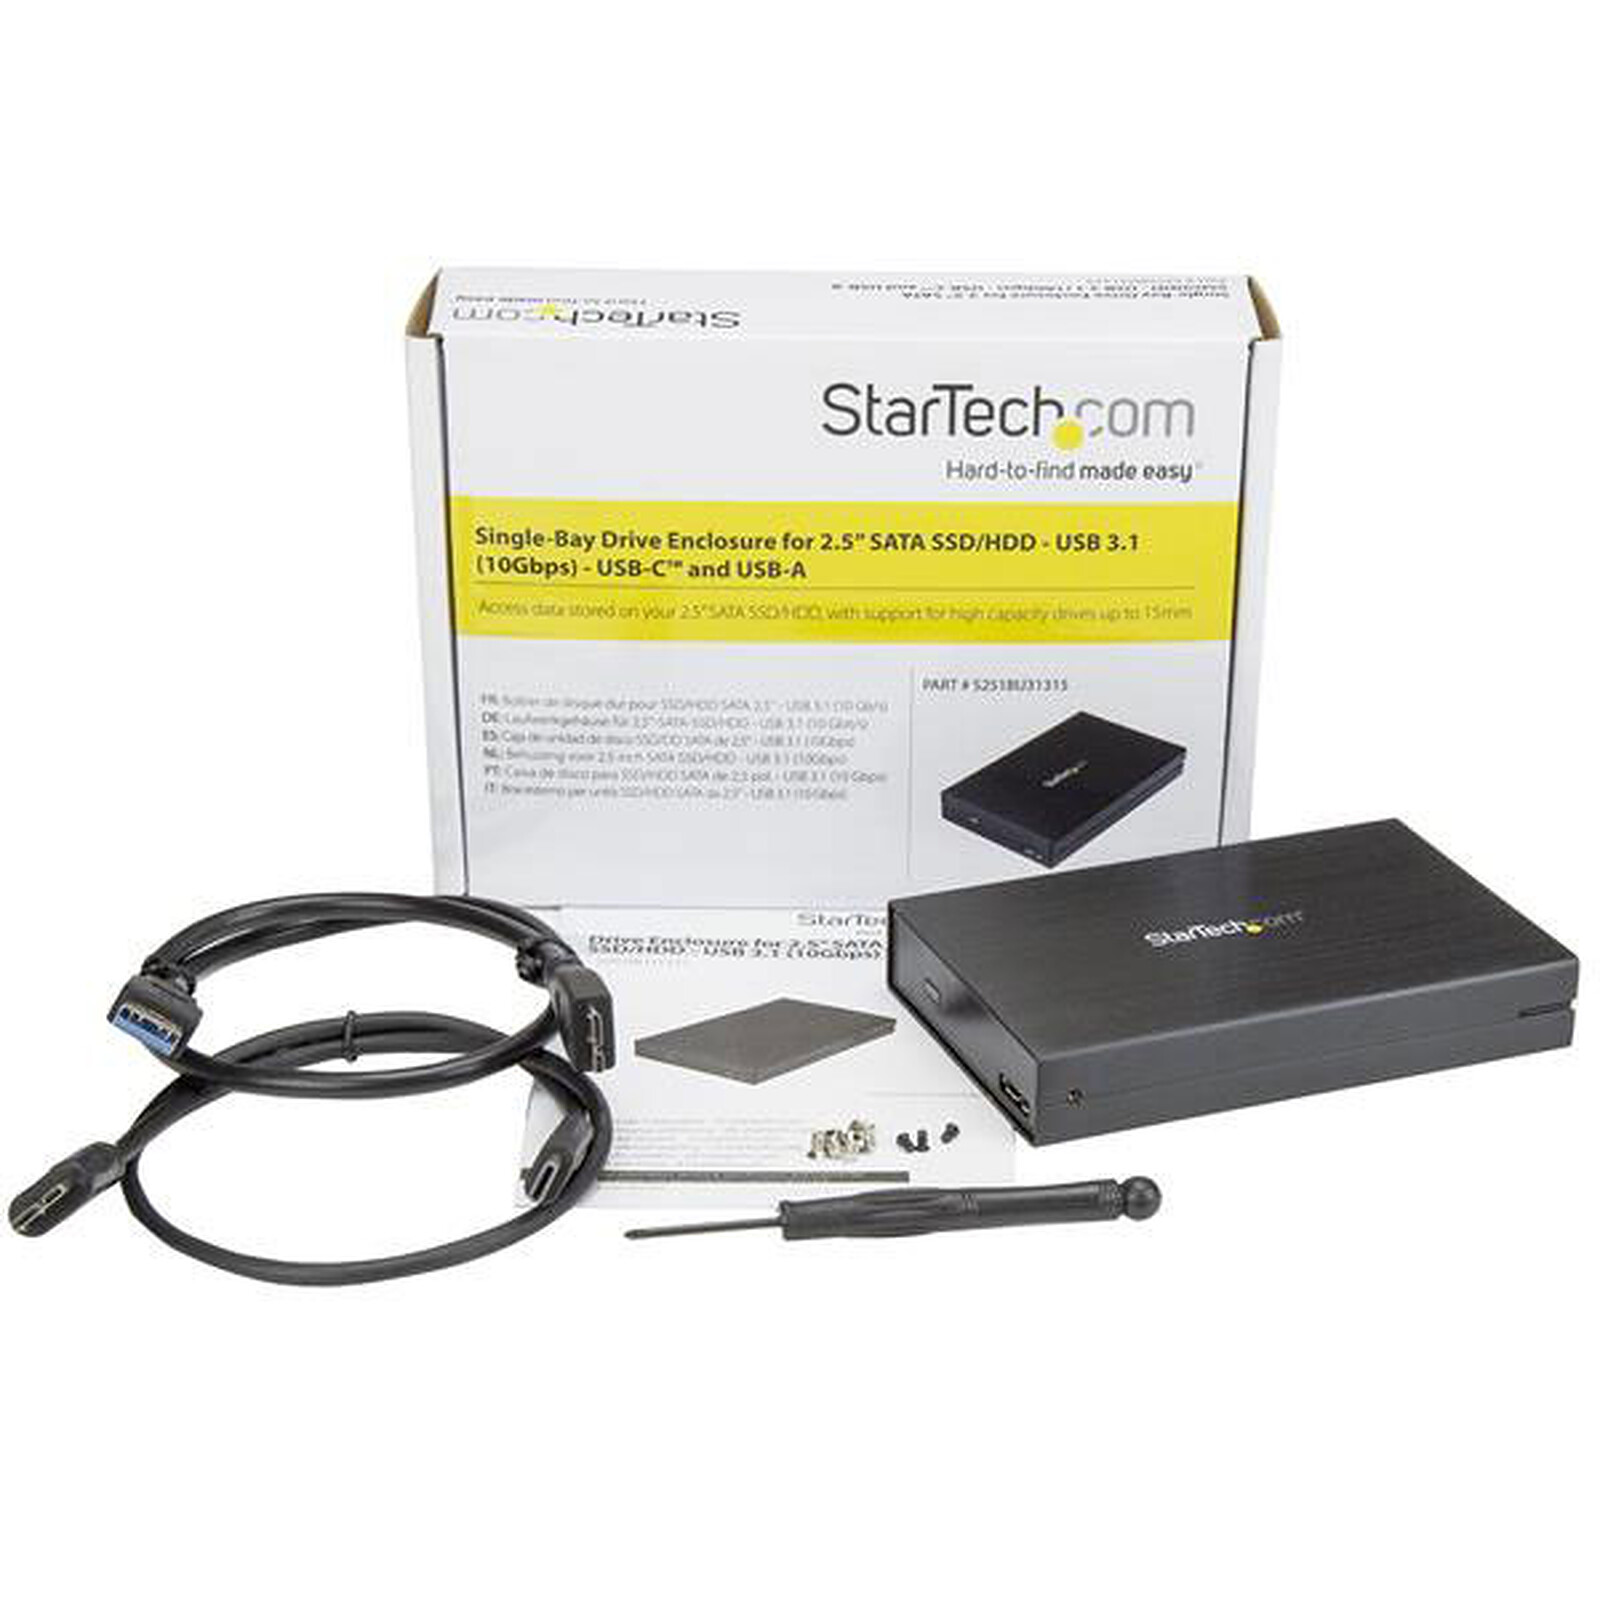 S251BPU31C3 External Hard Drive Enclosure for 2.5in SATA SSD/HDD Type-C Enclosure 10Gbps StarTech.com USB 3.1 Tool-Free Enclosure 